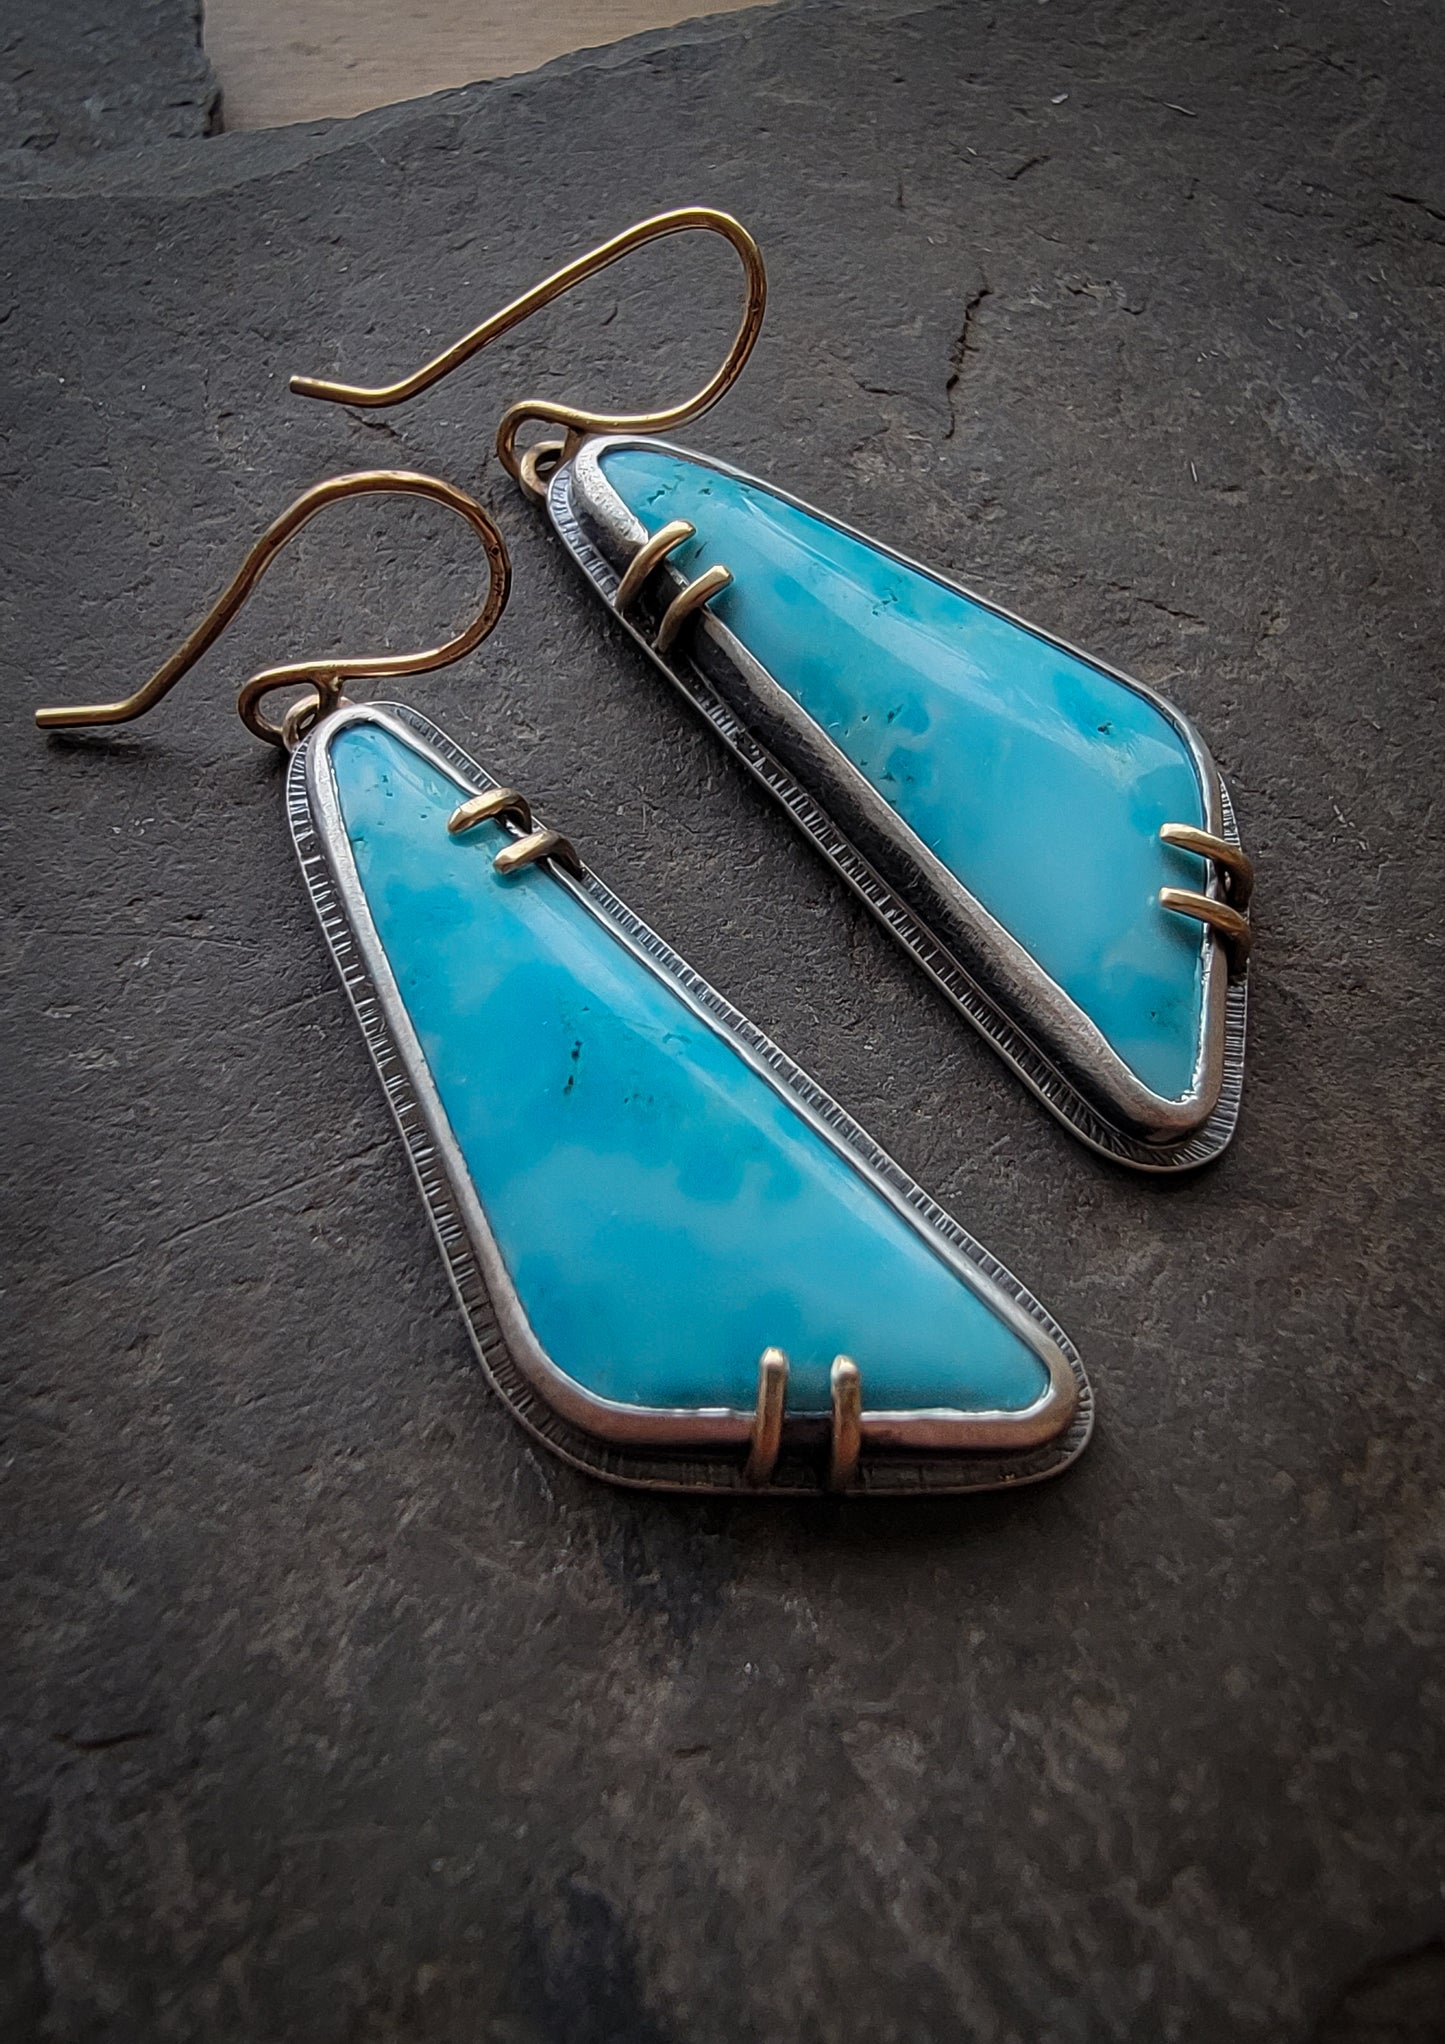 Sleeping Beauty Turquoise Earrings with Gold Accents